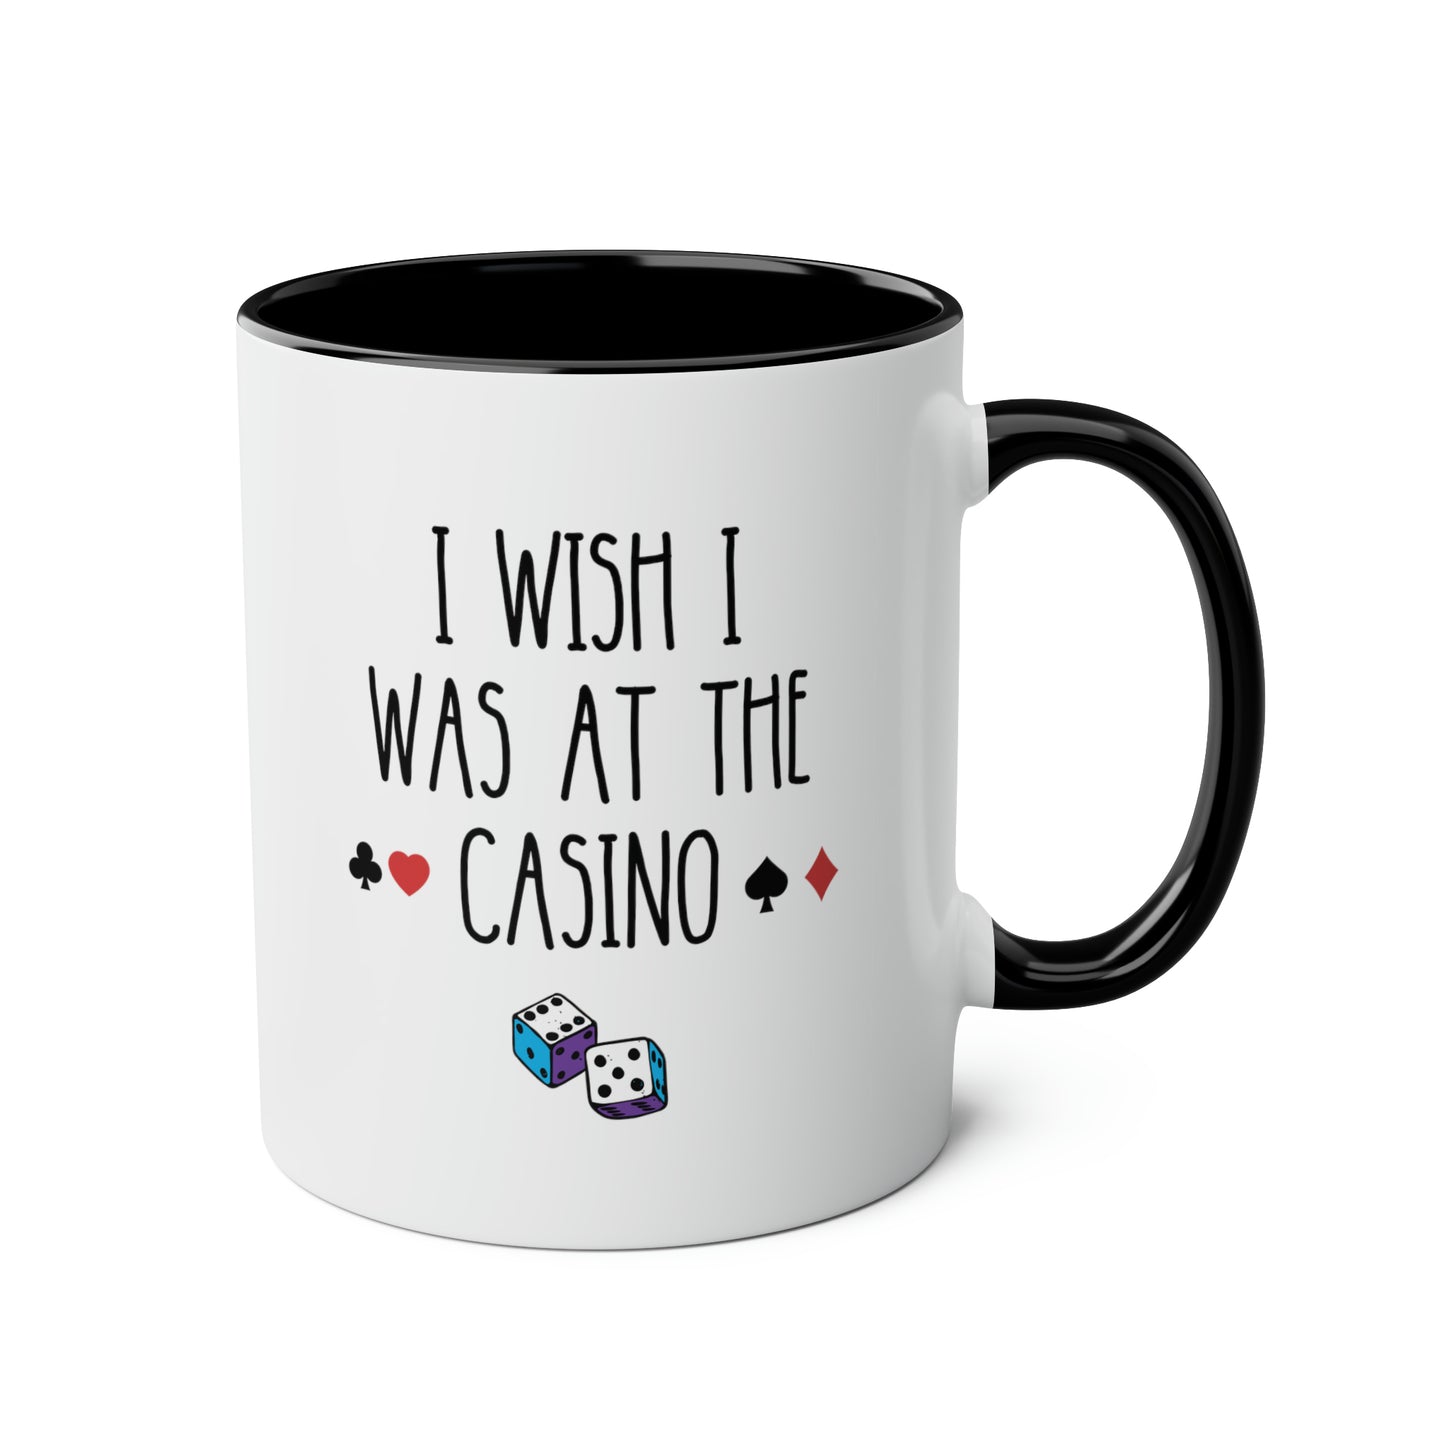 I Wish I Was At The Casino 11oz white with black accent funny large coffee mug gift for poker player gambling lover slot blackjack cup waveywares wavey wares wavywares wavy wares